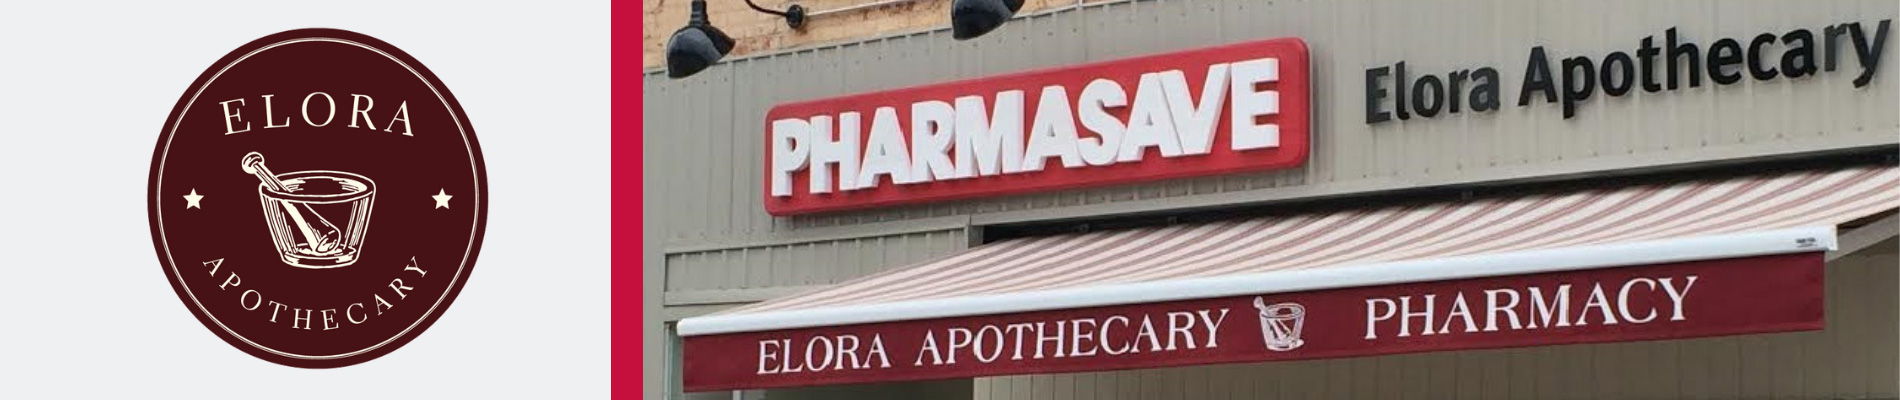 Elora Apothecary Store Front